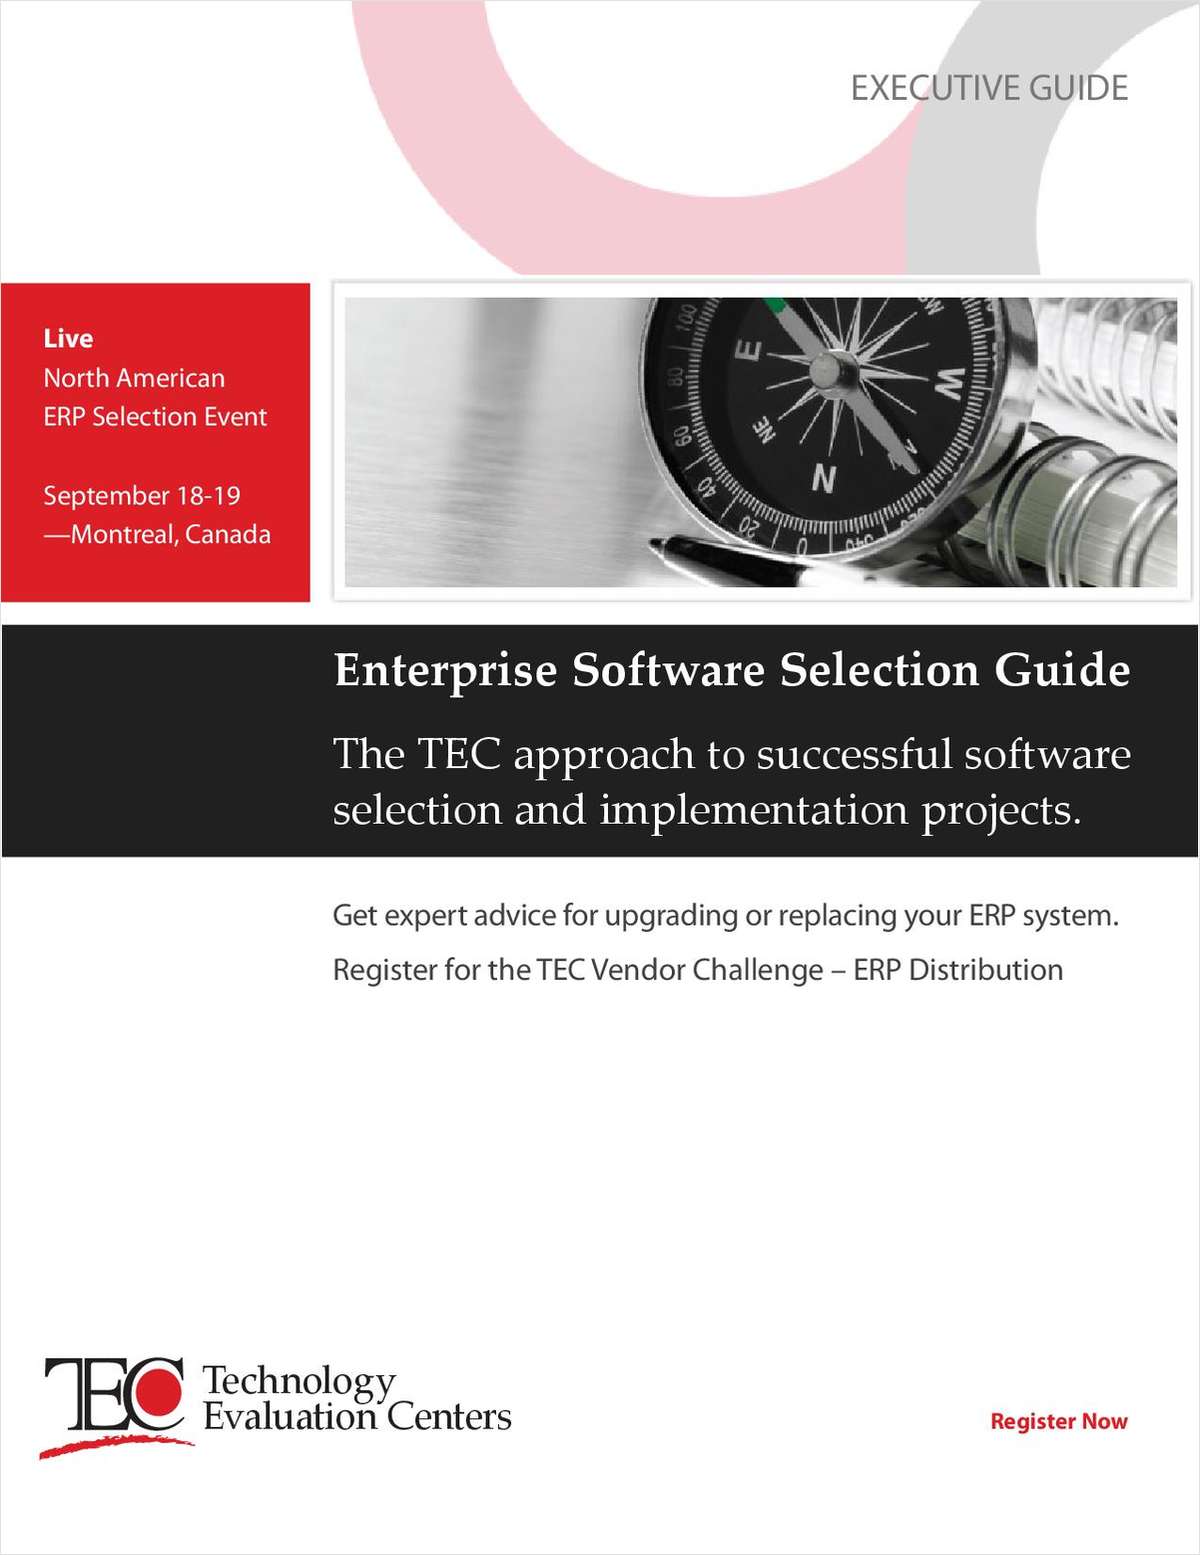 Executive Guide to Successful Software Selection